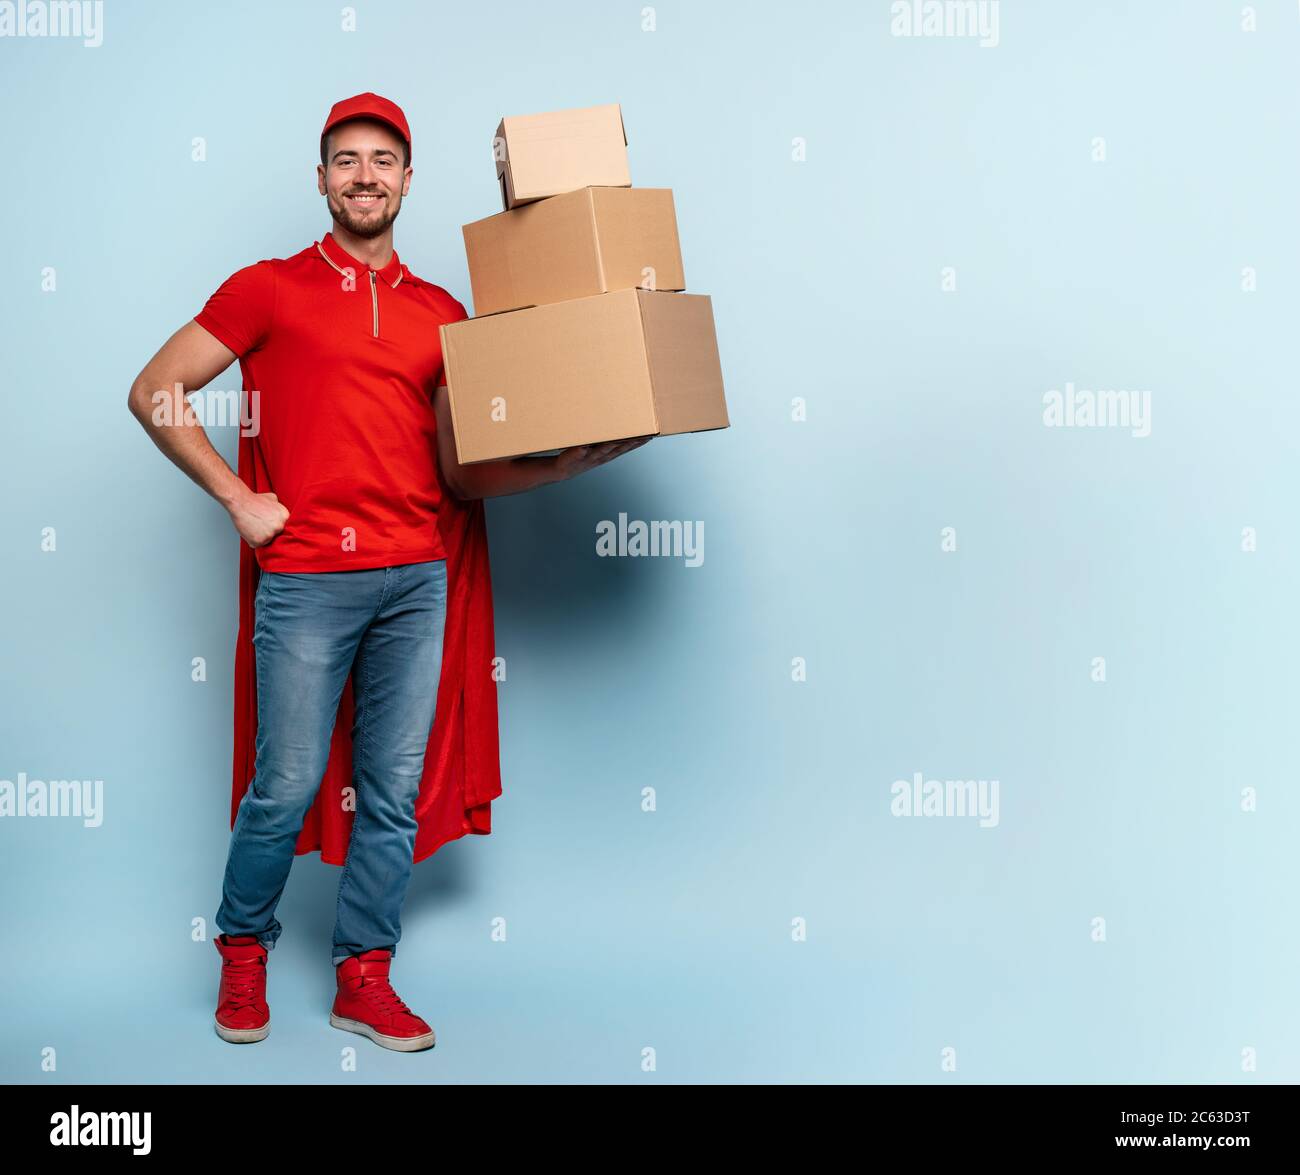 Courier has a lot of boxes to delivery. Emotional expression. Cyan background Stock Photo